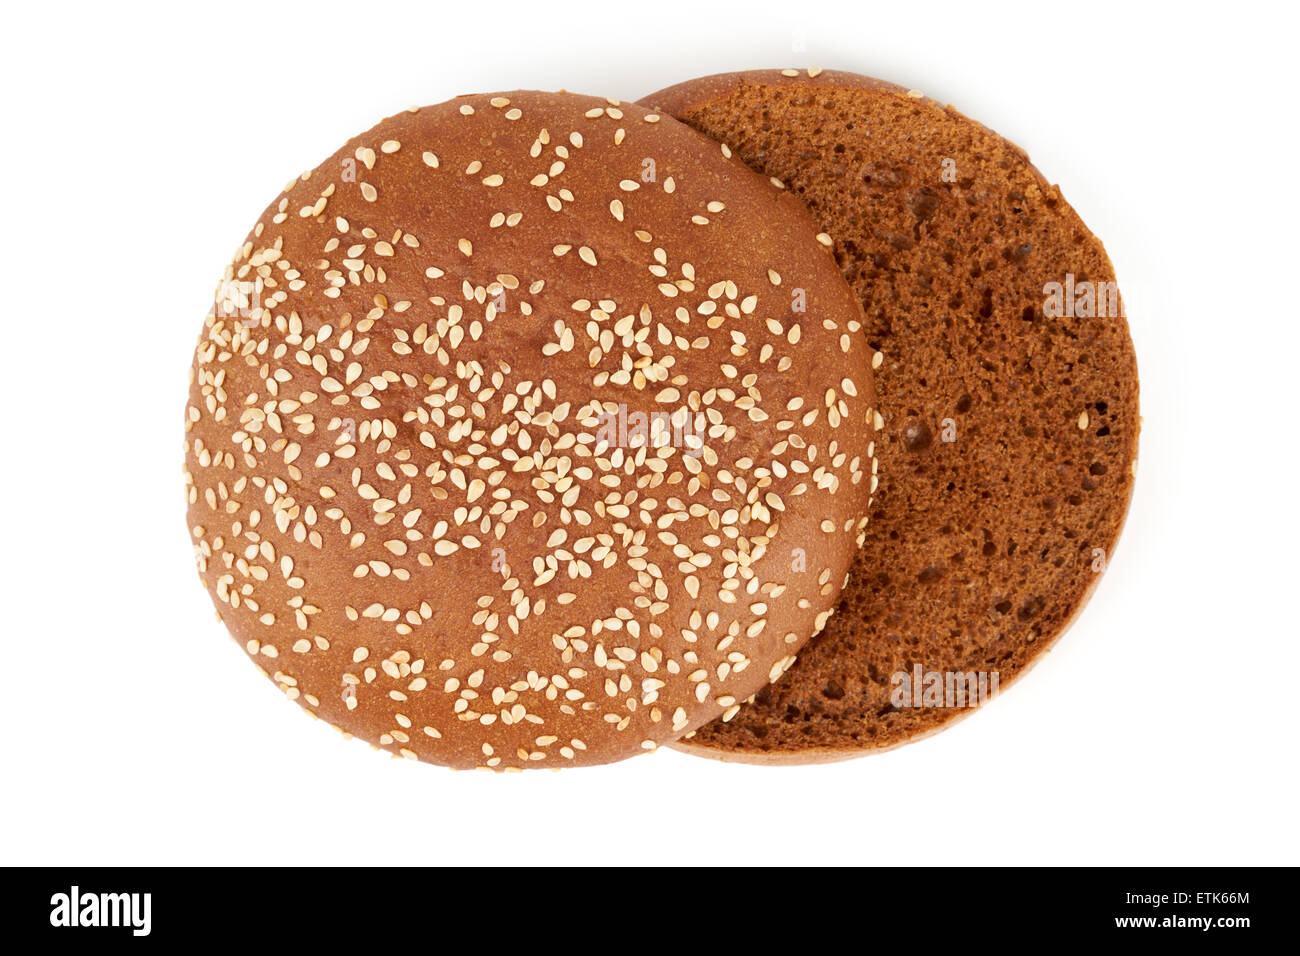 Upper view on dark sliced bun with sesame seeds for hamburger. Isolated on white. Stock Photo